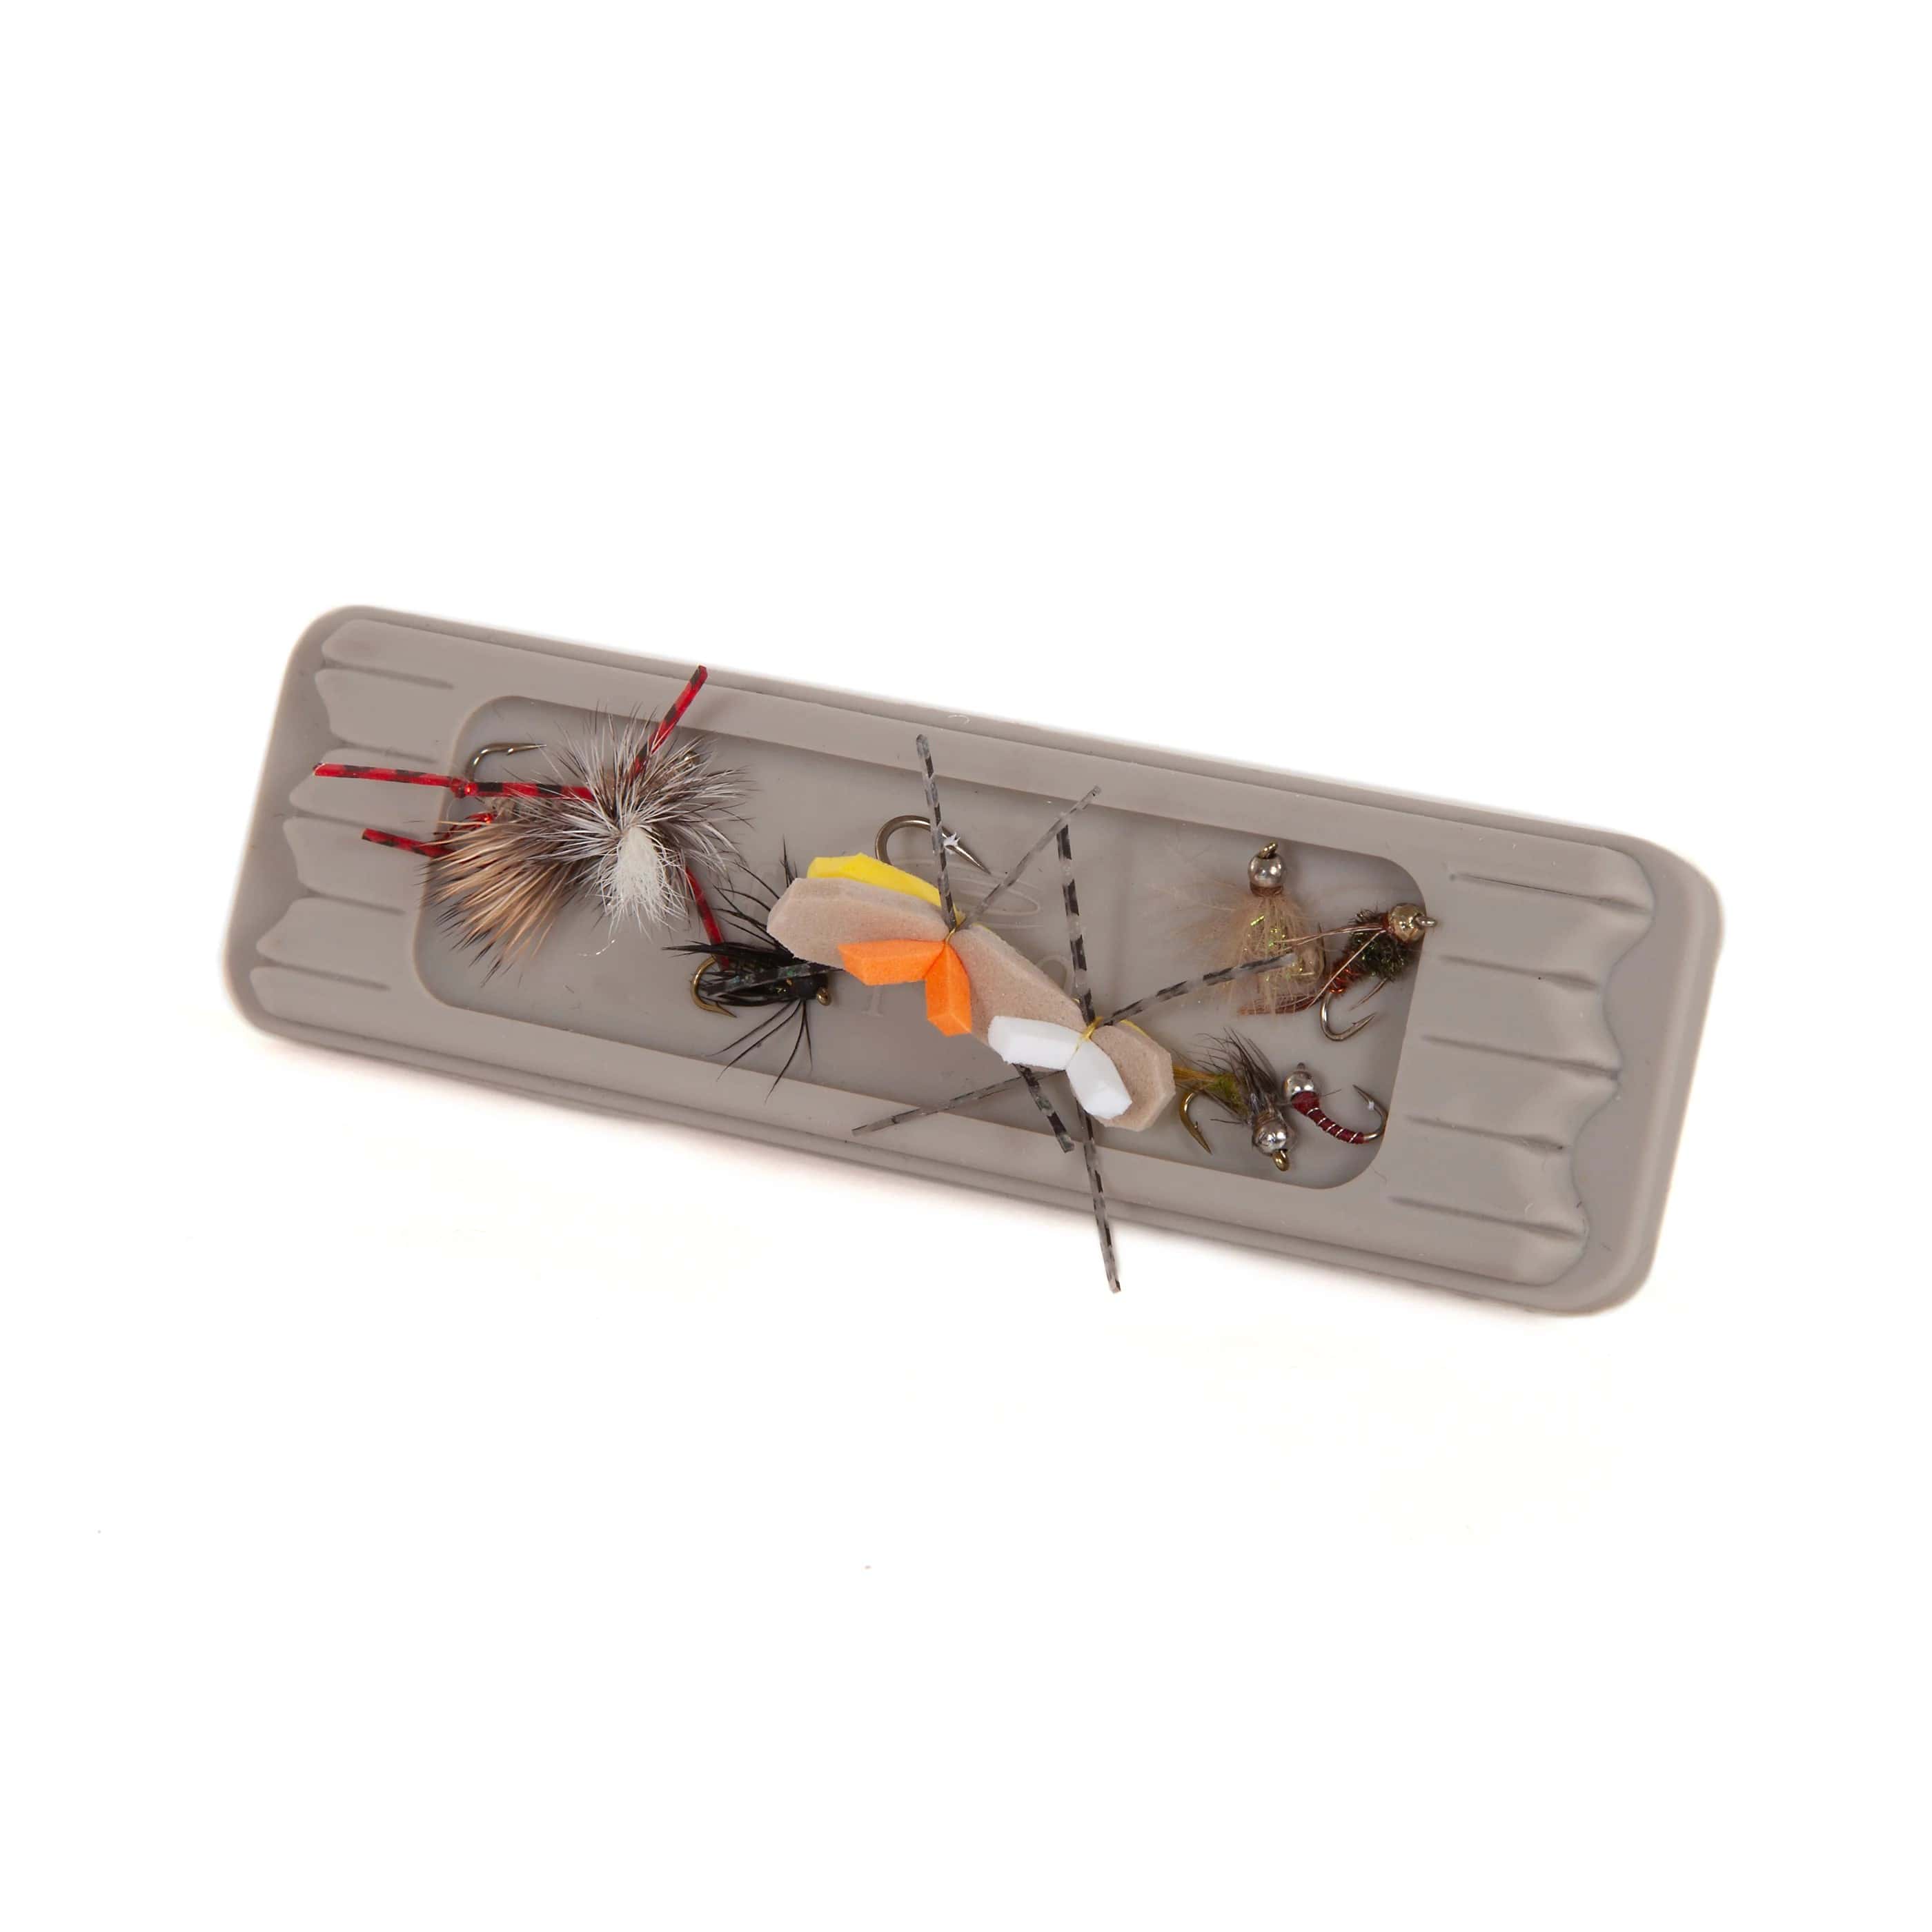 Fishpond Tacky Fly Dock MagPad  Magnetic Fly Fishing Patch Fly